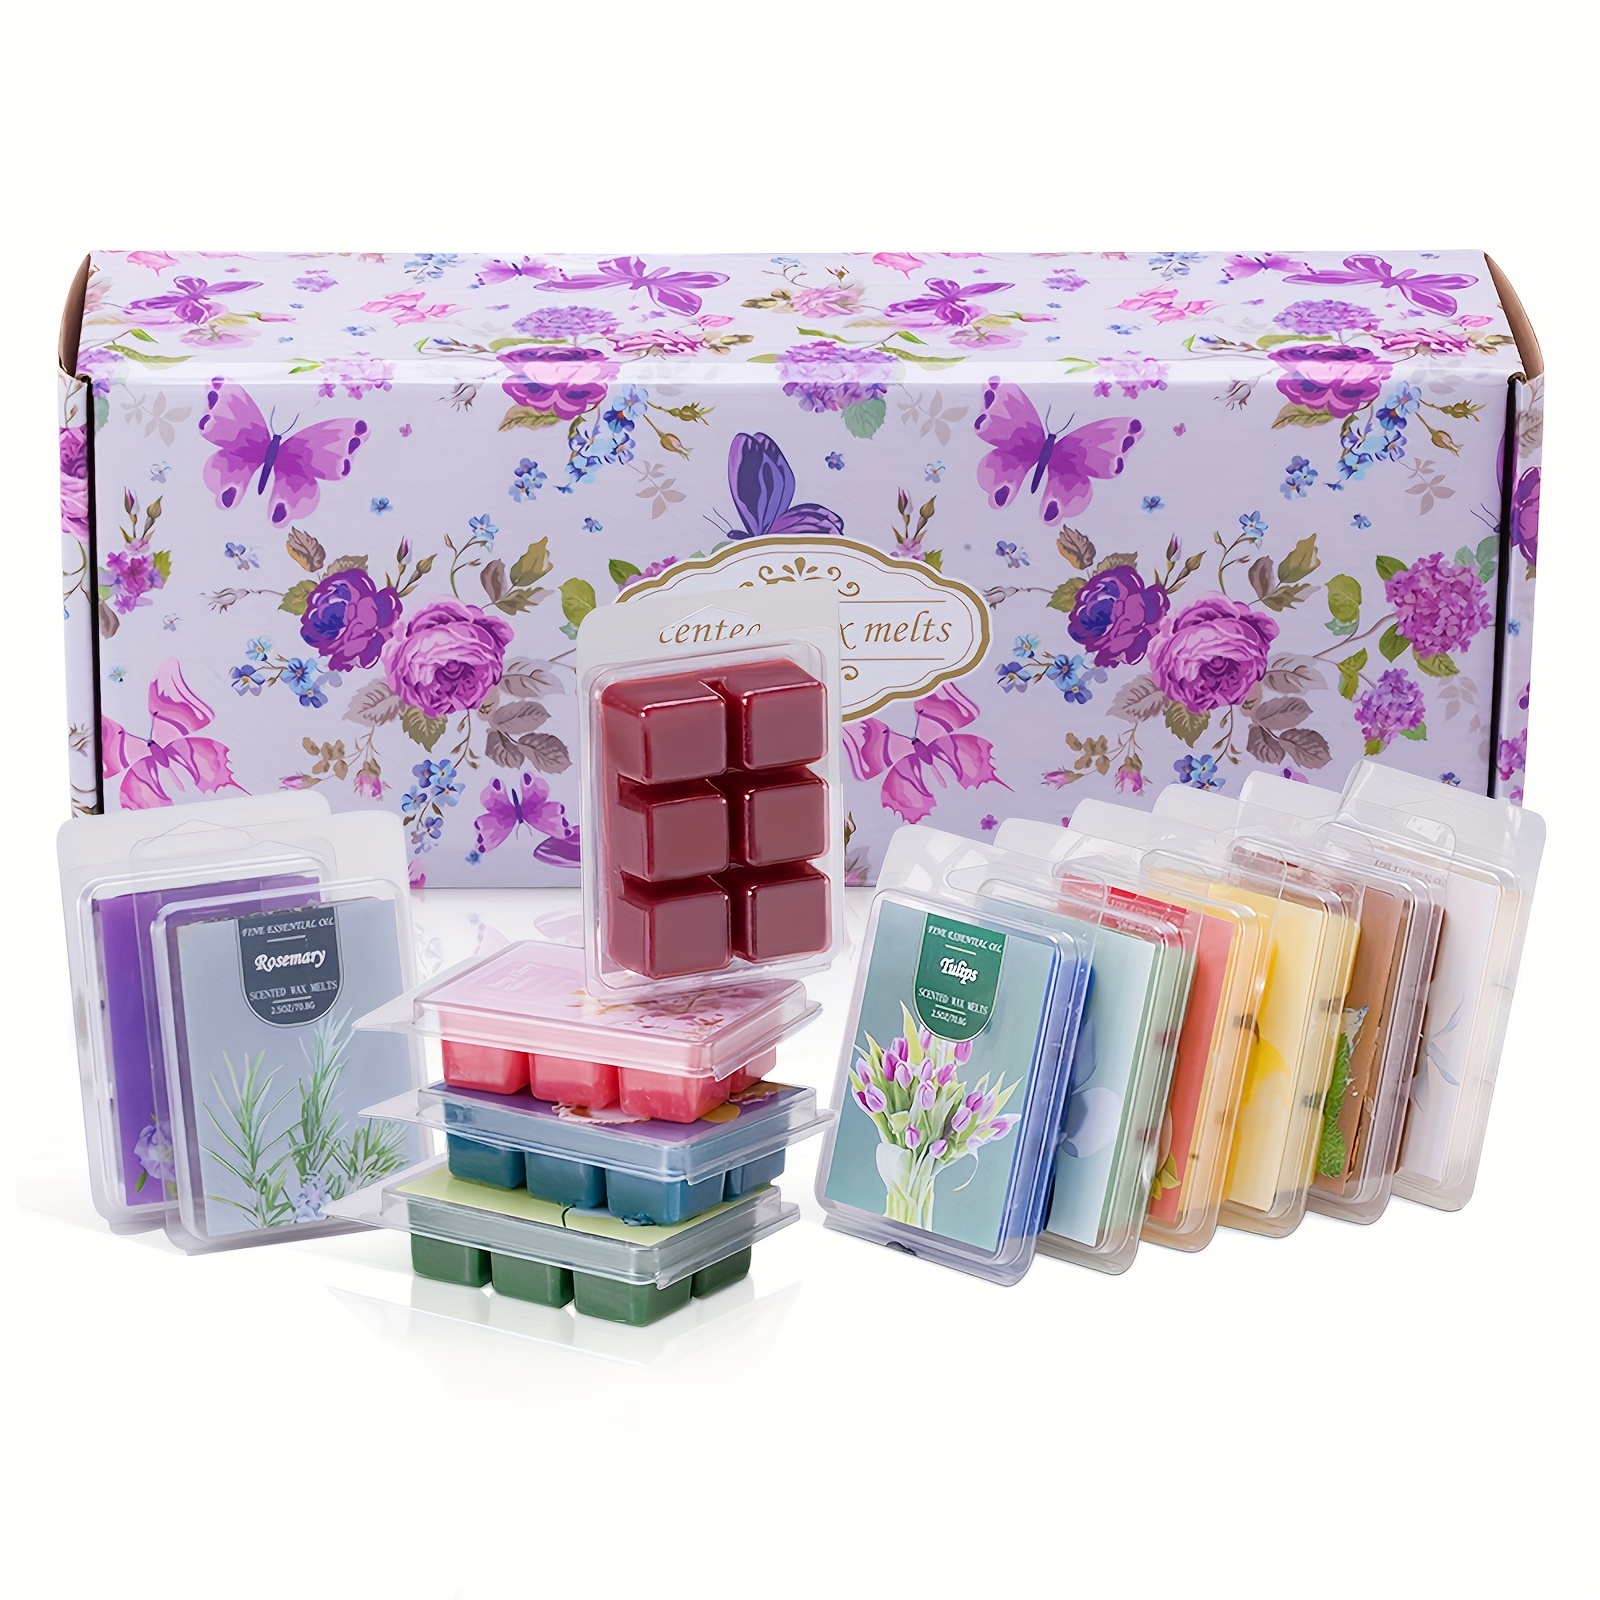 

12pcs/pack Scented Wax Melts Set For Diy Aromatherapy, Includes Lavender, Rose, Strawberry, And More, Long-lasting Wax Cubes For Home Relaxation And Spa Ambiance